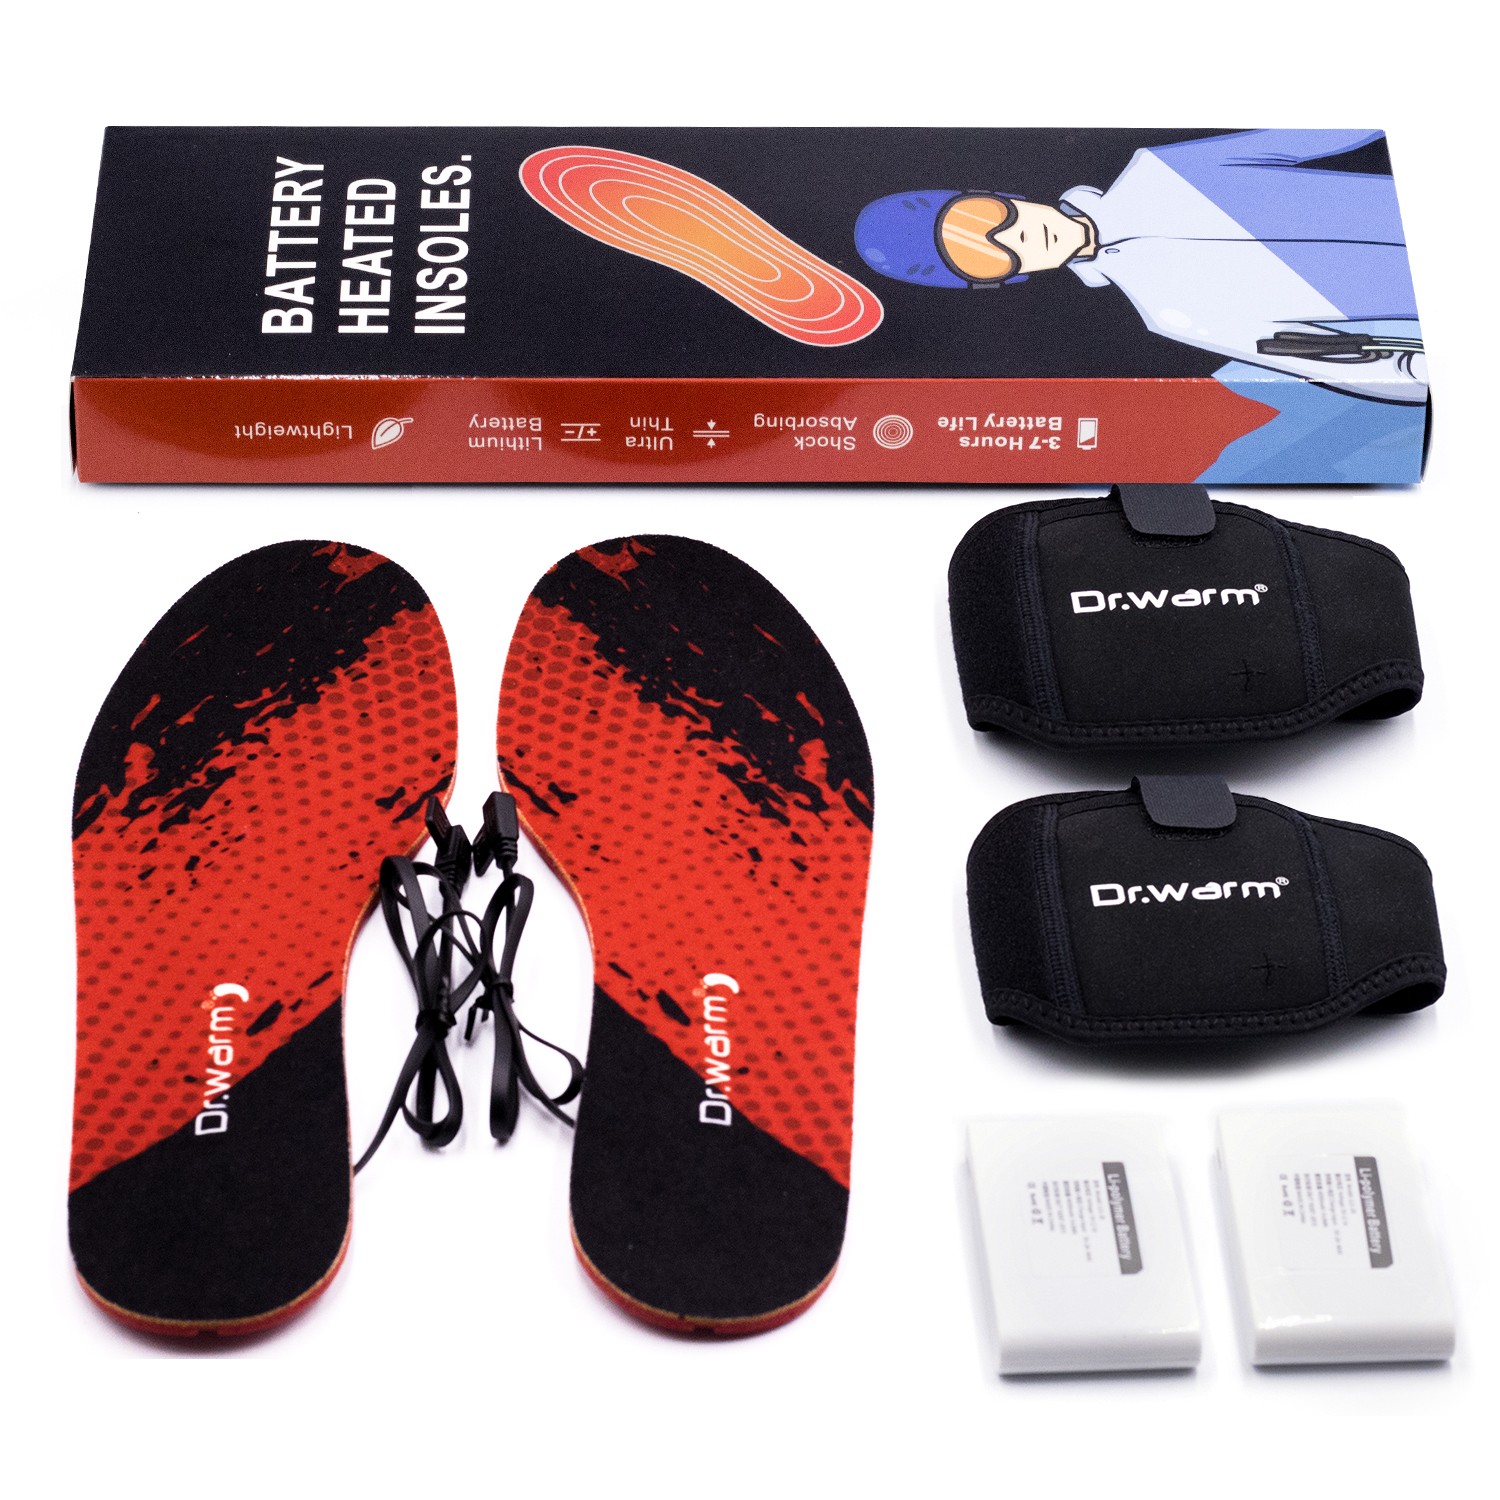 Dr. Warm dr.warm heated insoles-22